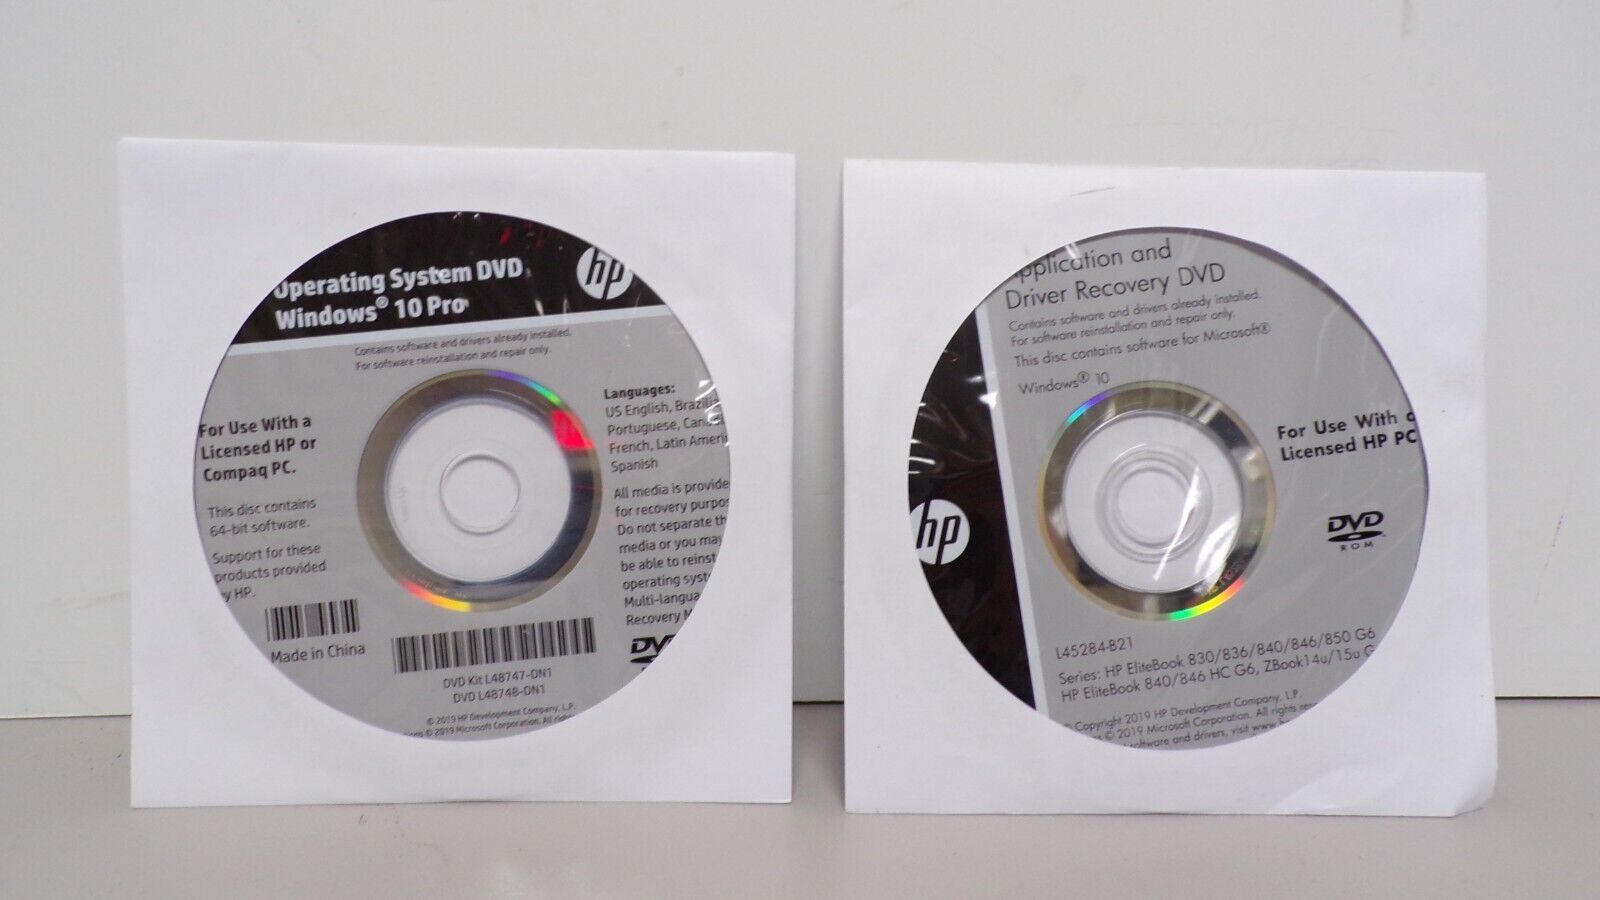 HP Operating System DVD Windows 10 Pro, Recovery and Driver ProBook 640/650 G5